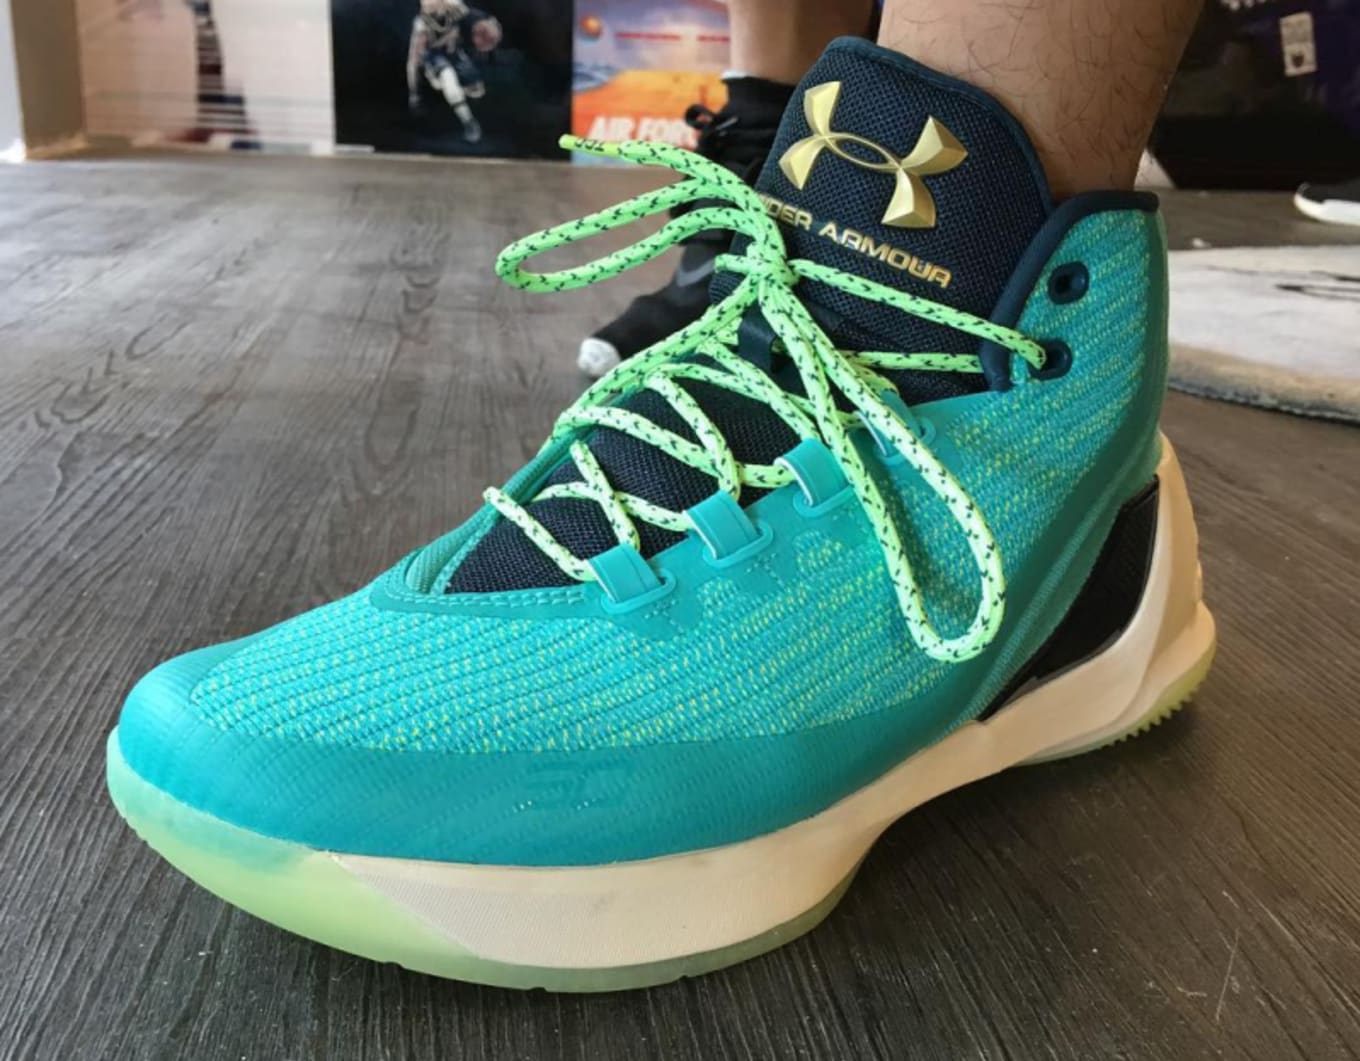 Under Armour Curry 3 Release Date | Collector